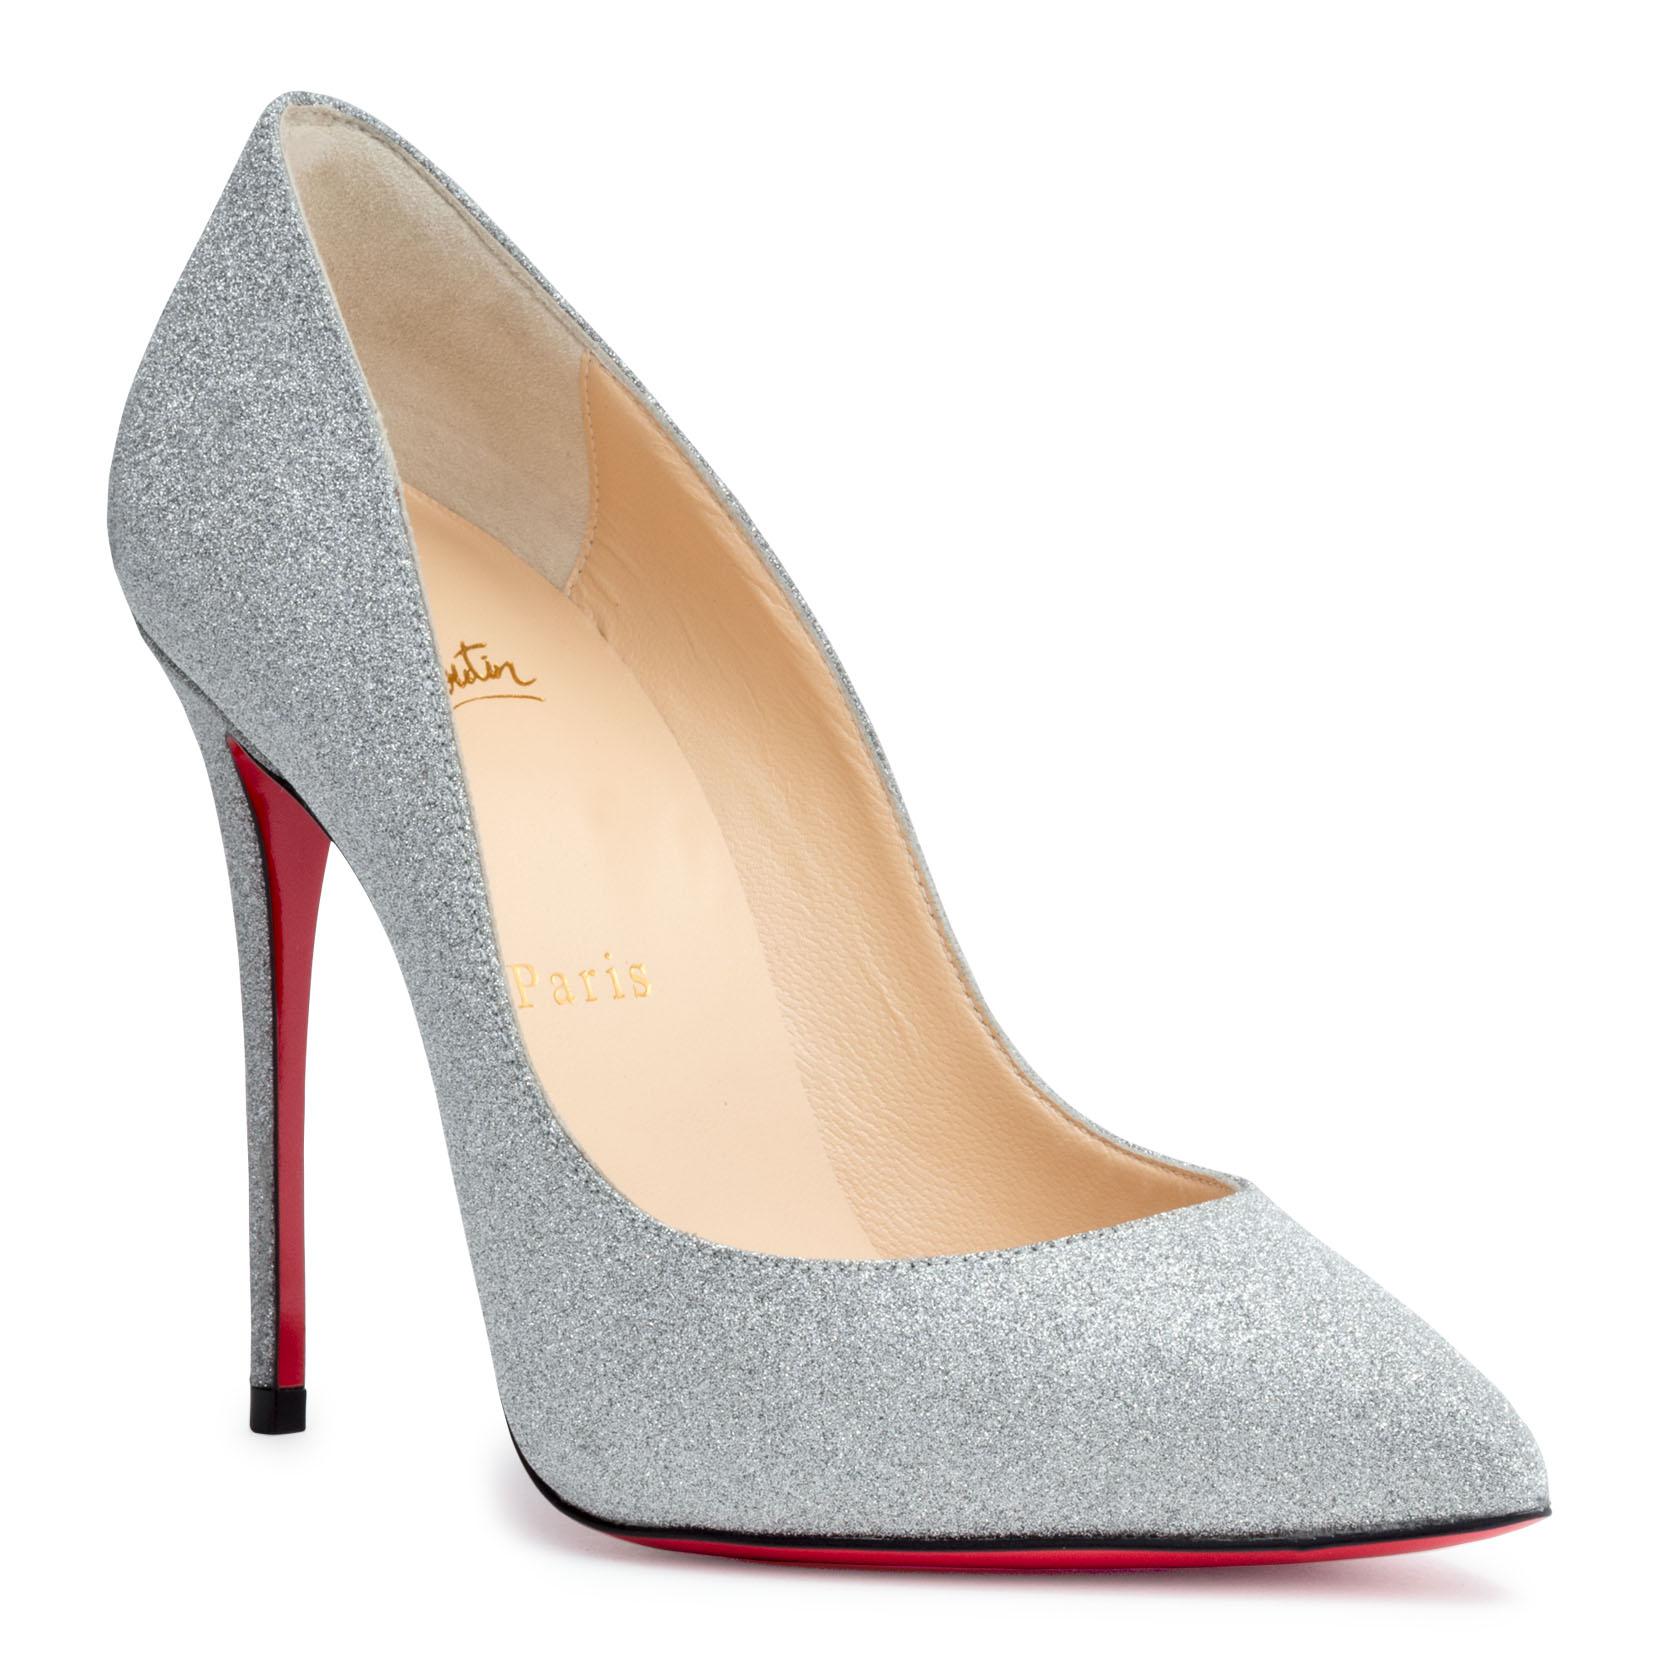 Lyst - Christian Louboutin Pigalle Follies 100 Silver Glitter Pumps in ...